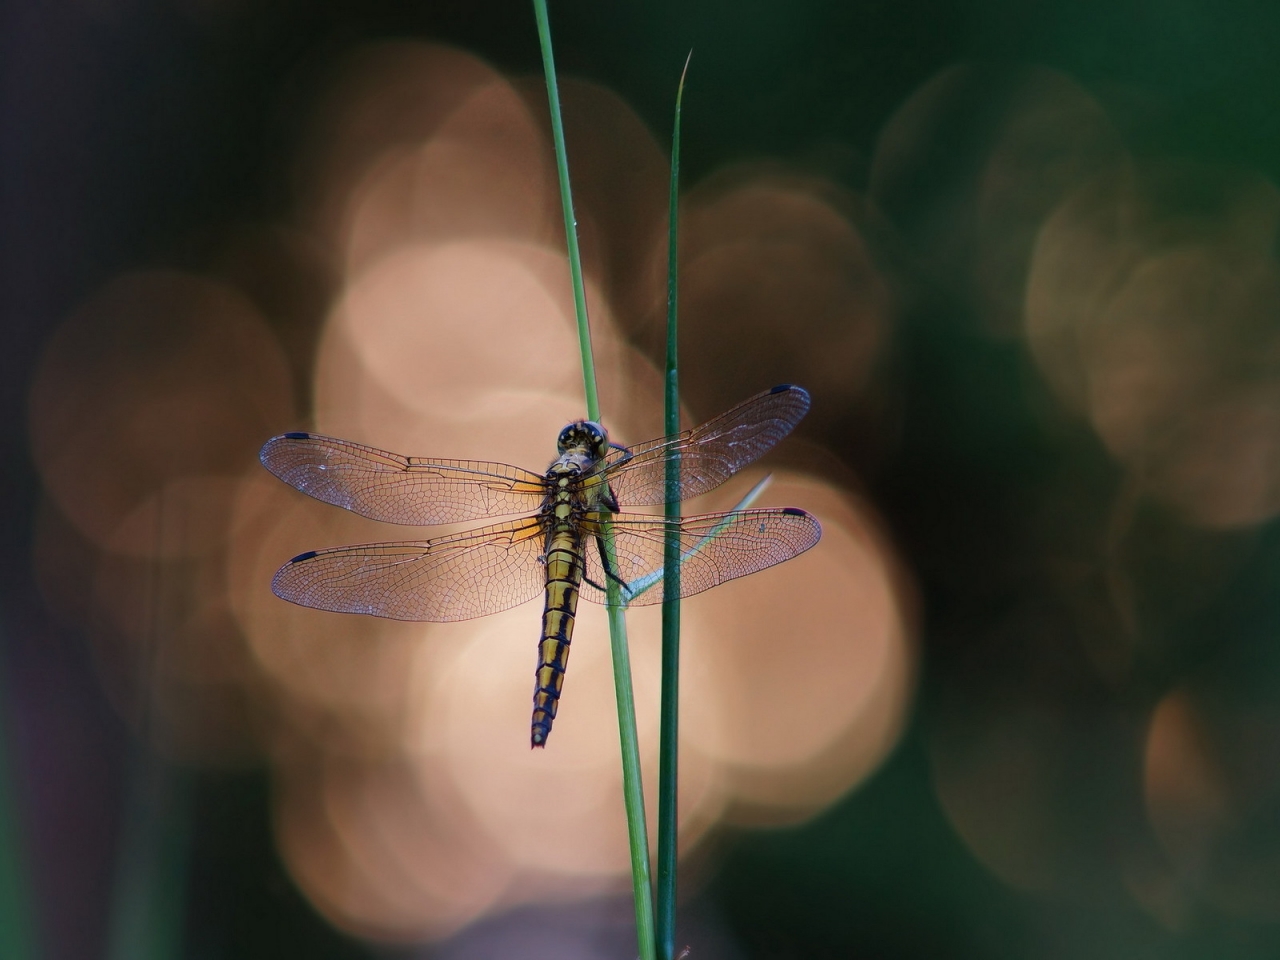 Blue Dragonfly on a Blade of Grass for 1280 x 960 resolution